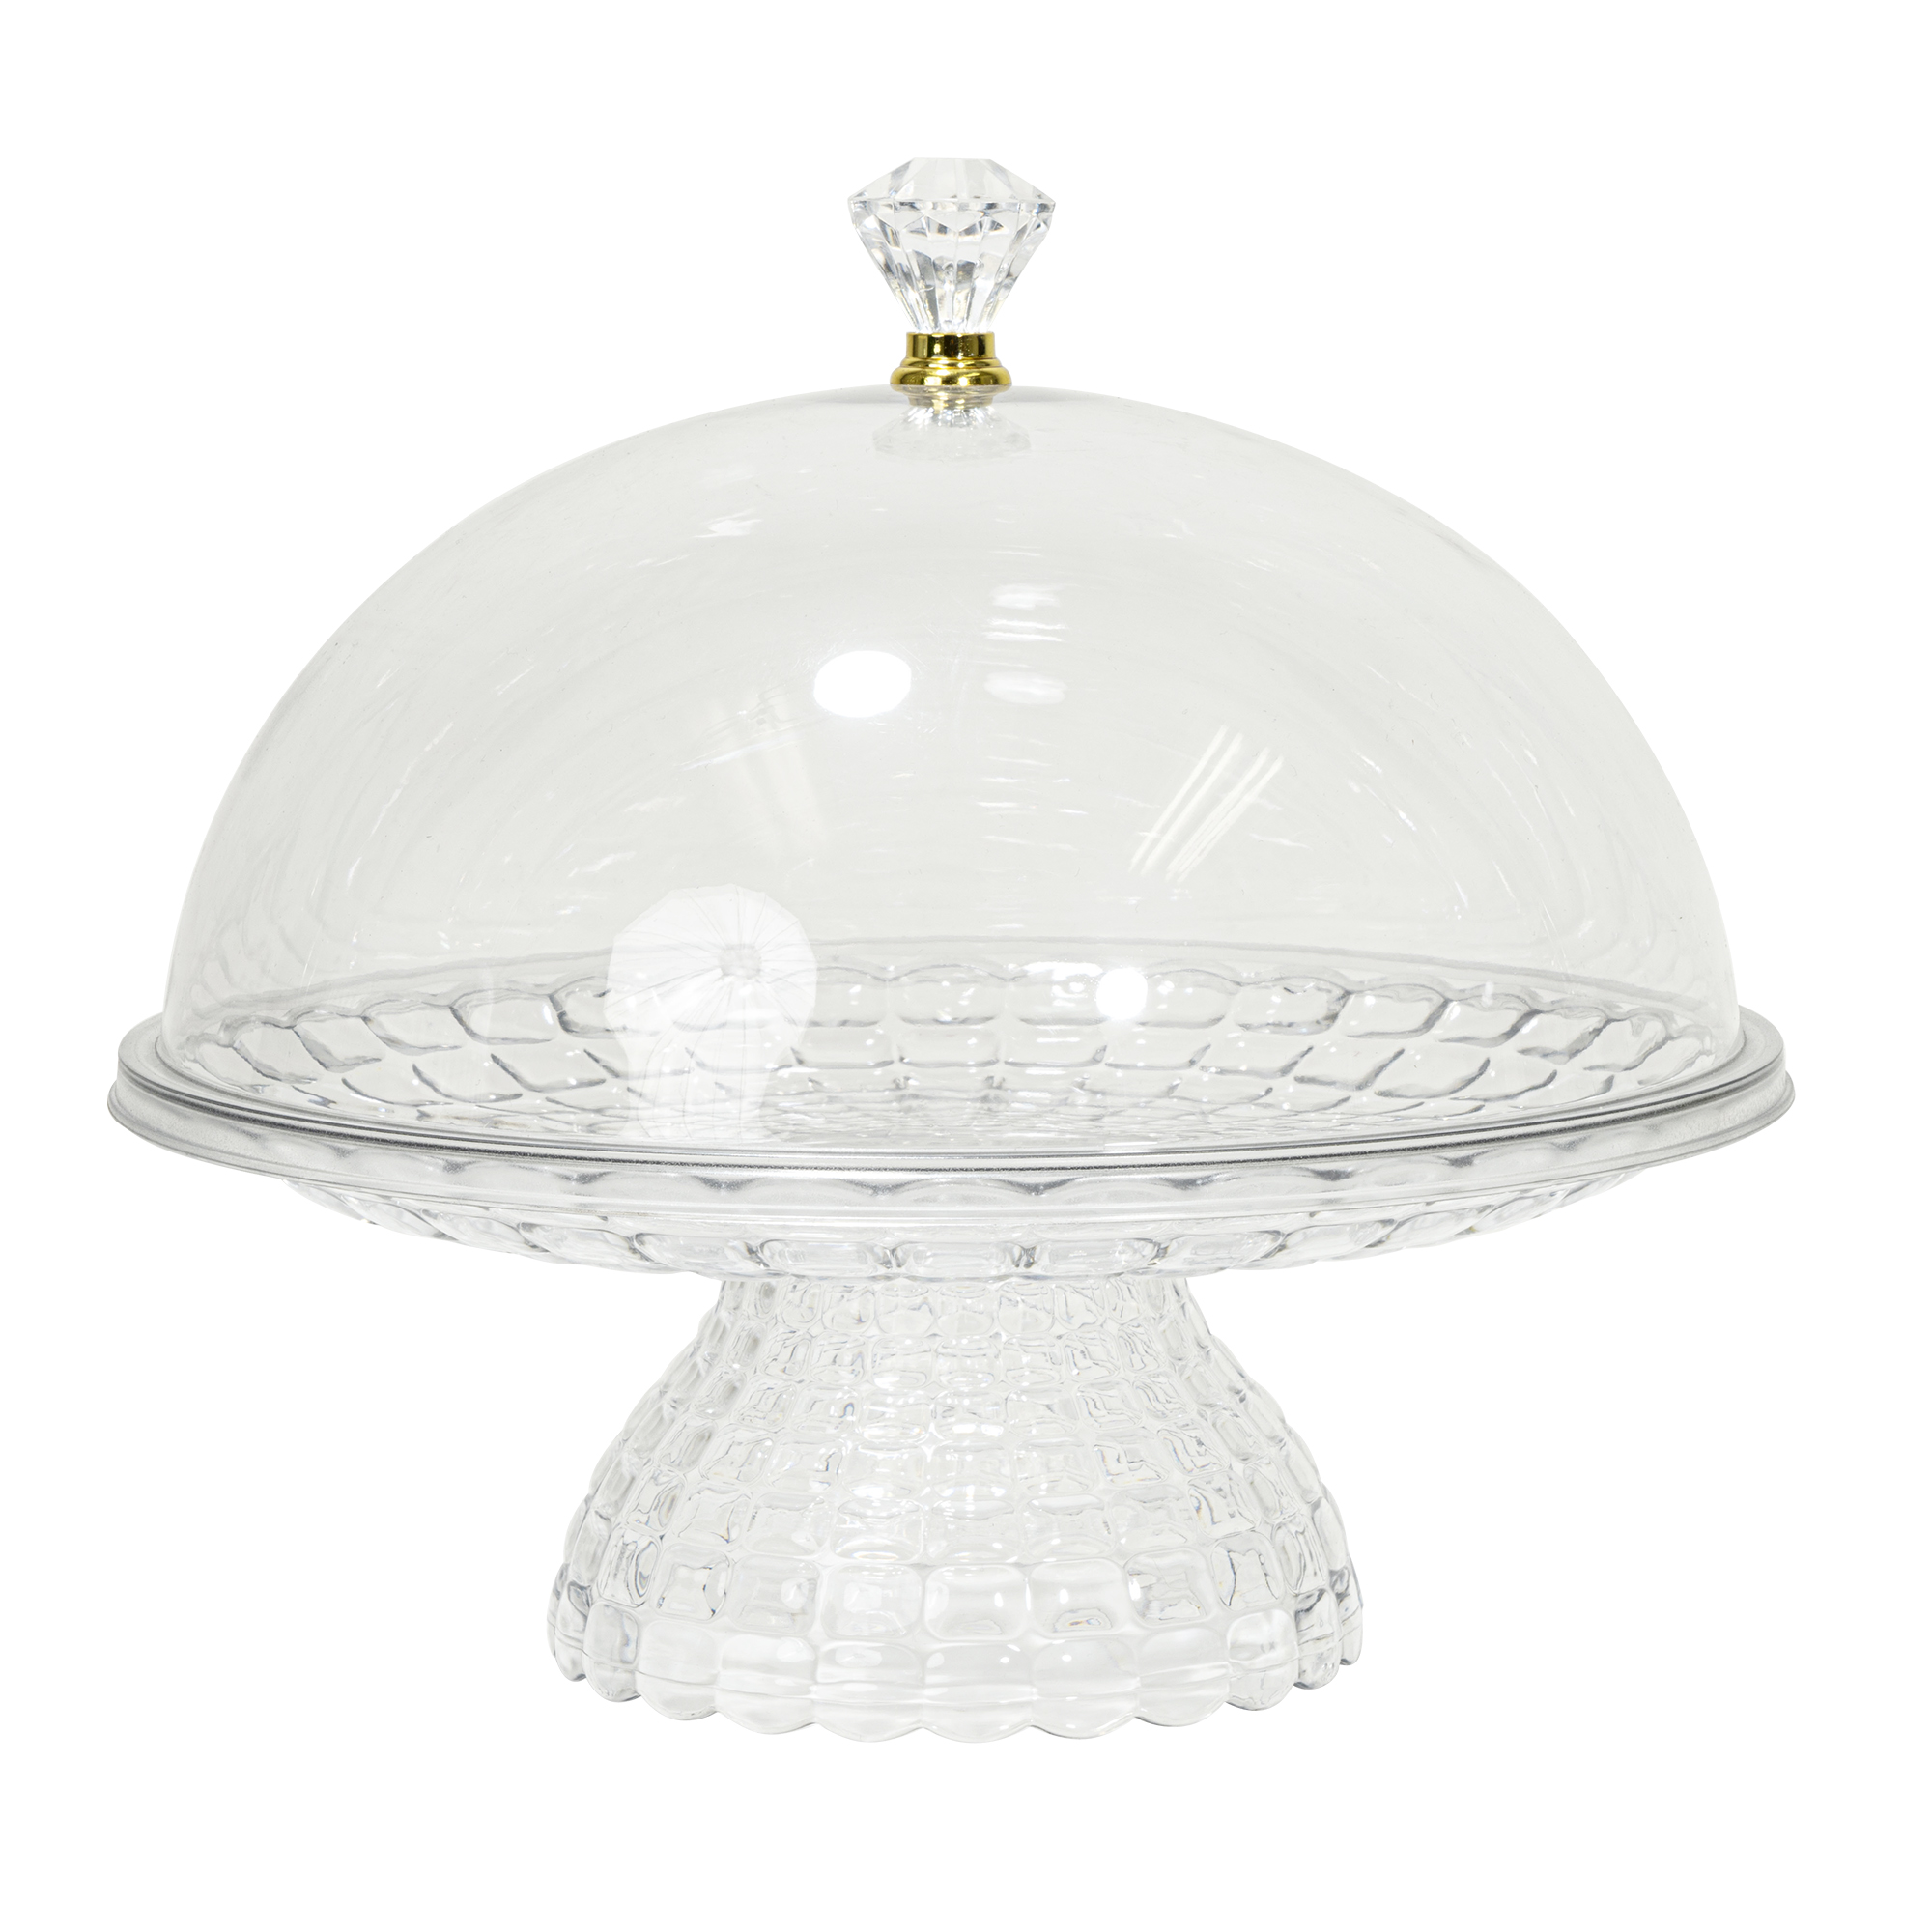 Plastic Cake Stand With Dome Lid 11½" - Clear